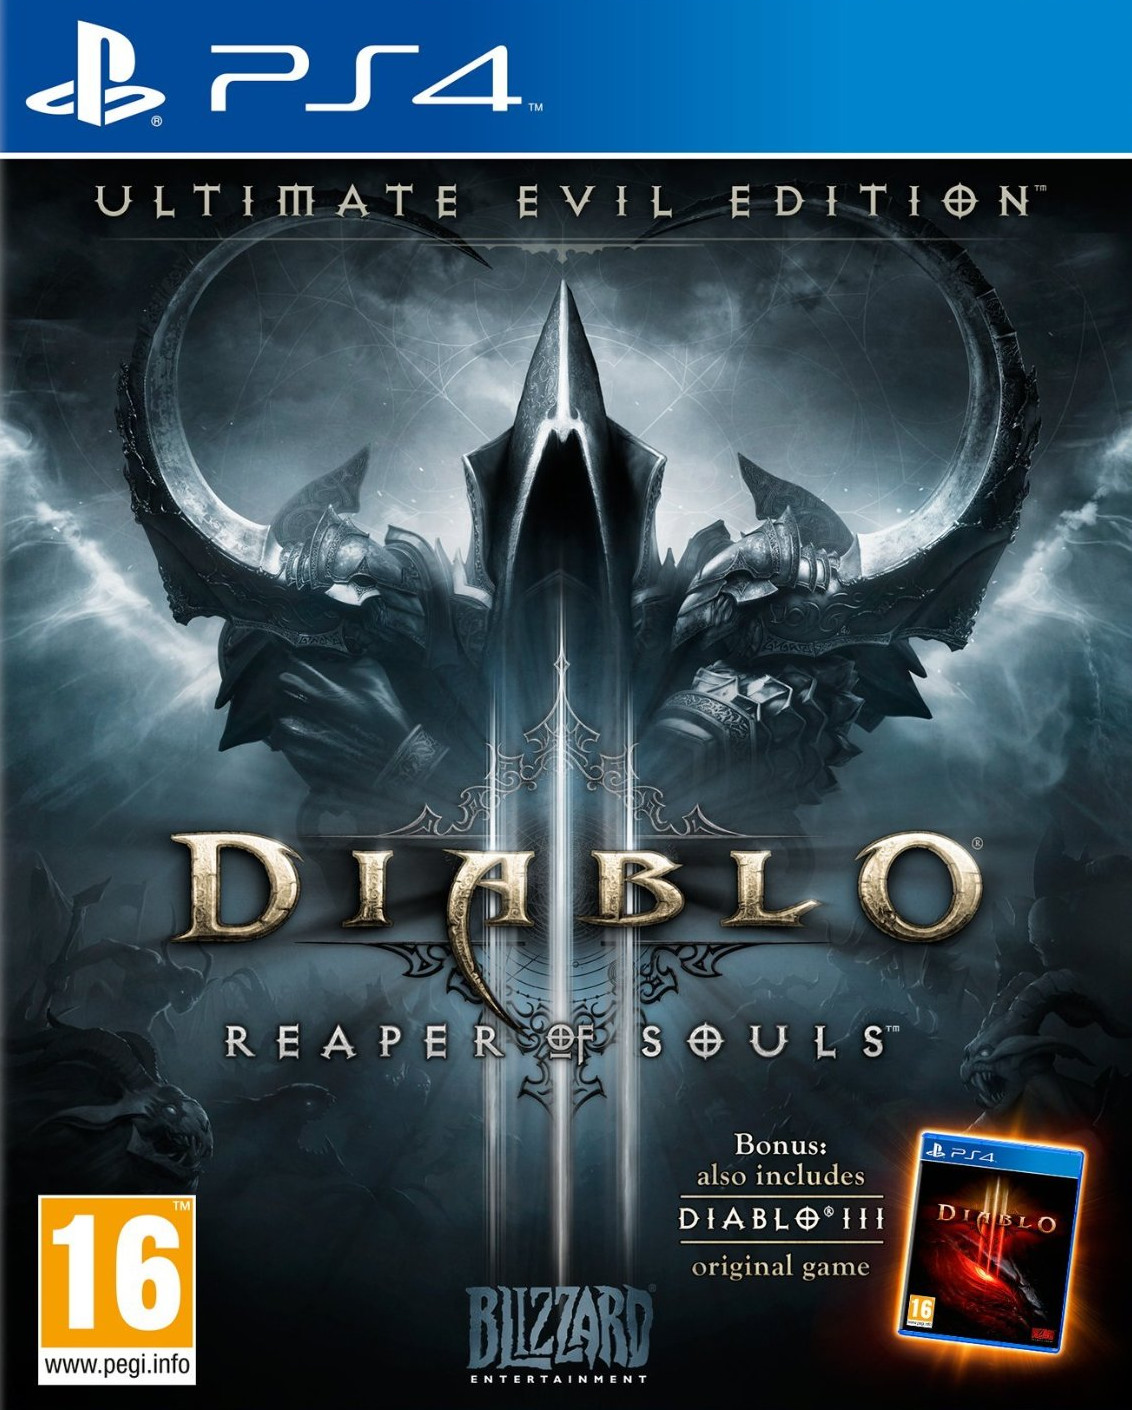 Photos - Game Blizzard Activision  Diablo 3: Reaper of Souls - Ultimate Evil Edition (PS4 